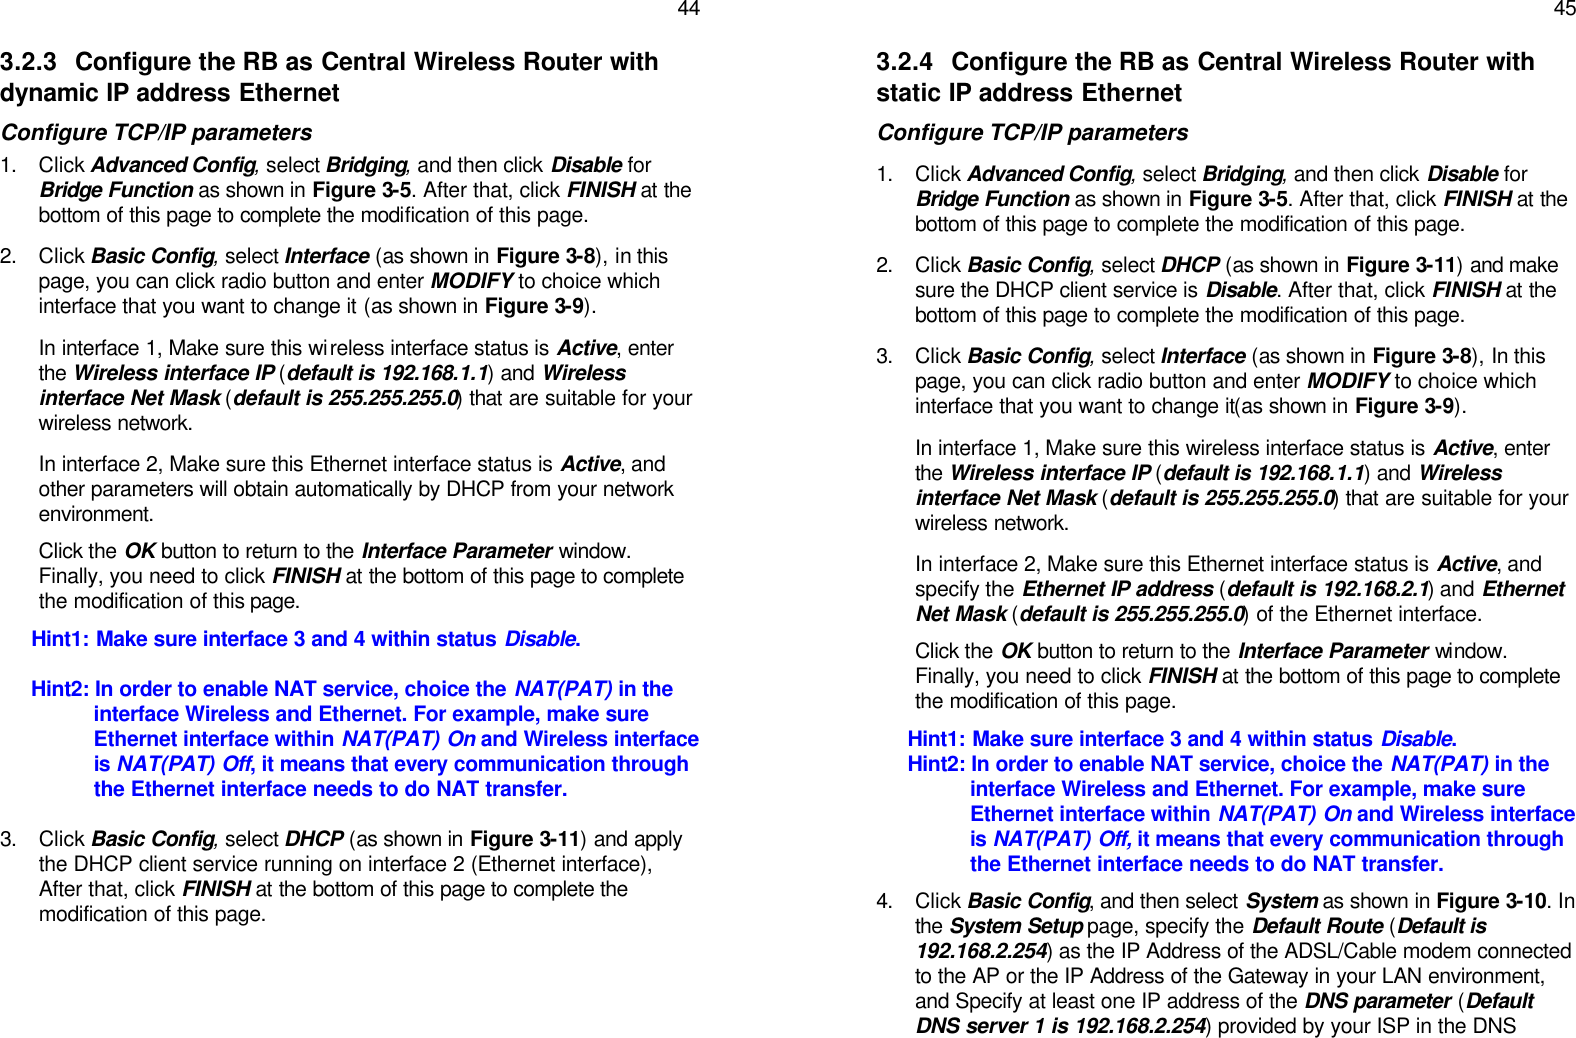   44 3.2.3 Configure the RB as Central Wireless Router with dynamic IP address Ethernet Configure TCP/IP parameters 1. Click Advanced Config, select Bridging, and then click Disable for Bridge Function as shown in Figure 3-5. After that, click FINISH at the bottom of this page to complete the modification of this page. 2. Click Basic Config, select Interface (as shown in Figure 3-8), in this page, you can click radio button and enter MODIFY to choice which interface that you want to change it (as shown in Figure 3-9). In interface 1, Make sure this wireless interface status is Active, enter the Wireless interface IP (default is 192.168.1.1) and Wireless interface Net Mask (default is 255.255.255.0) that are suitable for your wireless network. In interface 2, Make sure this Ethernet interface status is Active, and other parameters will obtain automatically by DHCP from your network environment. Click the OK button to return to the Interface Parameter window. Finally, you need to click FINISH at the bottom of this page to complete the modification of this page. Hint1: Make sure interface 3 and 4 within status Disable. Hint2: In order to enable NAT service, choice the NAT(PAT) in the interface Wireless and Ethernet. For example, make sure Ethernet interface within NAT(PAT) On and Wireless interface is NAT(PAT) Off, it means that every communication through the Ethernet interface needs to do NAT transfer. 3. Click Basic Config, select DHCP (as shown in Figure 3-11) and apply the DHCP client service running on interface 2 (Ethernet interface), After that, click FINISH at the bottom of this page to complete the modification of this page.    45 3.2.4 Configure the RB as Central Wireless Router with static IP address Ethernet Configure TCP/IP parameters 1. Click Advanced Config, select Bridging, and then click Disable for Bridge Function as shown in Figure 3-5. After that, click FINISH at the bottom of this page to complete the modification of this page. 2. Click Basic Config, select DHCP (as shown in Figure 3-11) and make sure the DHCP client service is Disable. After that, click FINISH at the bottom of this page to complete the modification of this page. 3. Click Basic Config, select Interface (as shown in Figure 3-8), In this page, you can click radio button and enter MODIFY to choice which interface that you want to change it(as shown in Figure 3-9). In interface 1, Make sure this wireless interface status is Active, enter the Wireless interface IP (default is 192.168.1.1) and Wireless interface Net Mask (default is 255.255.255.0) that are suitable for your wireless network. In interface 2, Make sure this Ethernet interface status is Active, and specify the Ethernet IP address (default is 192.168.2.1) and Ethernet Net Mask (default is 255.255.255.0) of the Ethernet interface.  Click the OK button to return to the Interface Parameter window. Finally, you need to click FINISH at the bottom of this page to complete the modification of this page. Hint1: Make sure interface 3 and 4 within status Disable. Hint2: In order to enable NAT service, choice the NAT(PAT) in the interface Wireless and Ethernet. For example, make sure Ethernet interface within NAT(PAT) On and Wireless interface is NAT(PAT) Off, it means that every communication through the Ethernet interface needs to do NAT transfer. 4. Click Basic Config, and then select System as shown in Figure 3-10. In the System Setup page, specify the Default Route (Default is 192.168.2.254) as the IP Address of the ADSL/Cable modem connected to the AP or the IP Address of the Gateway in your LAN environment, and Specify at least one IP address of the DNS parameter (Default DNS server 1 is 192.168.2.254) provided by your ISP in the DNS 